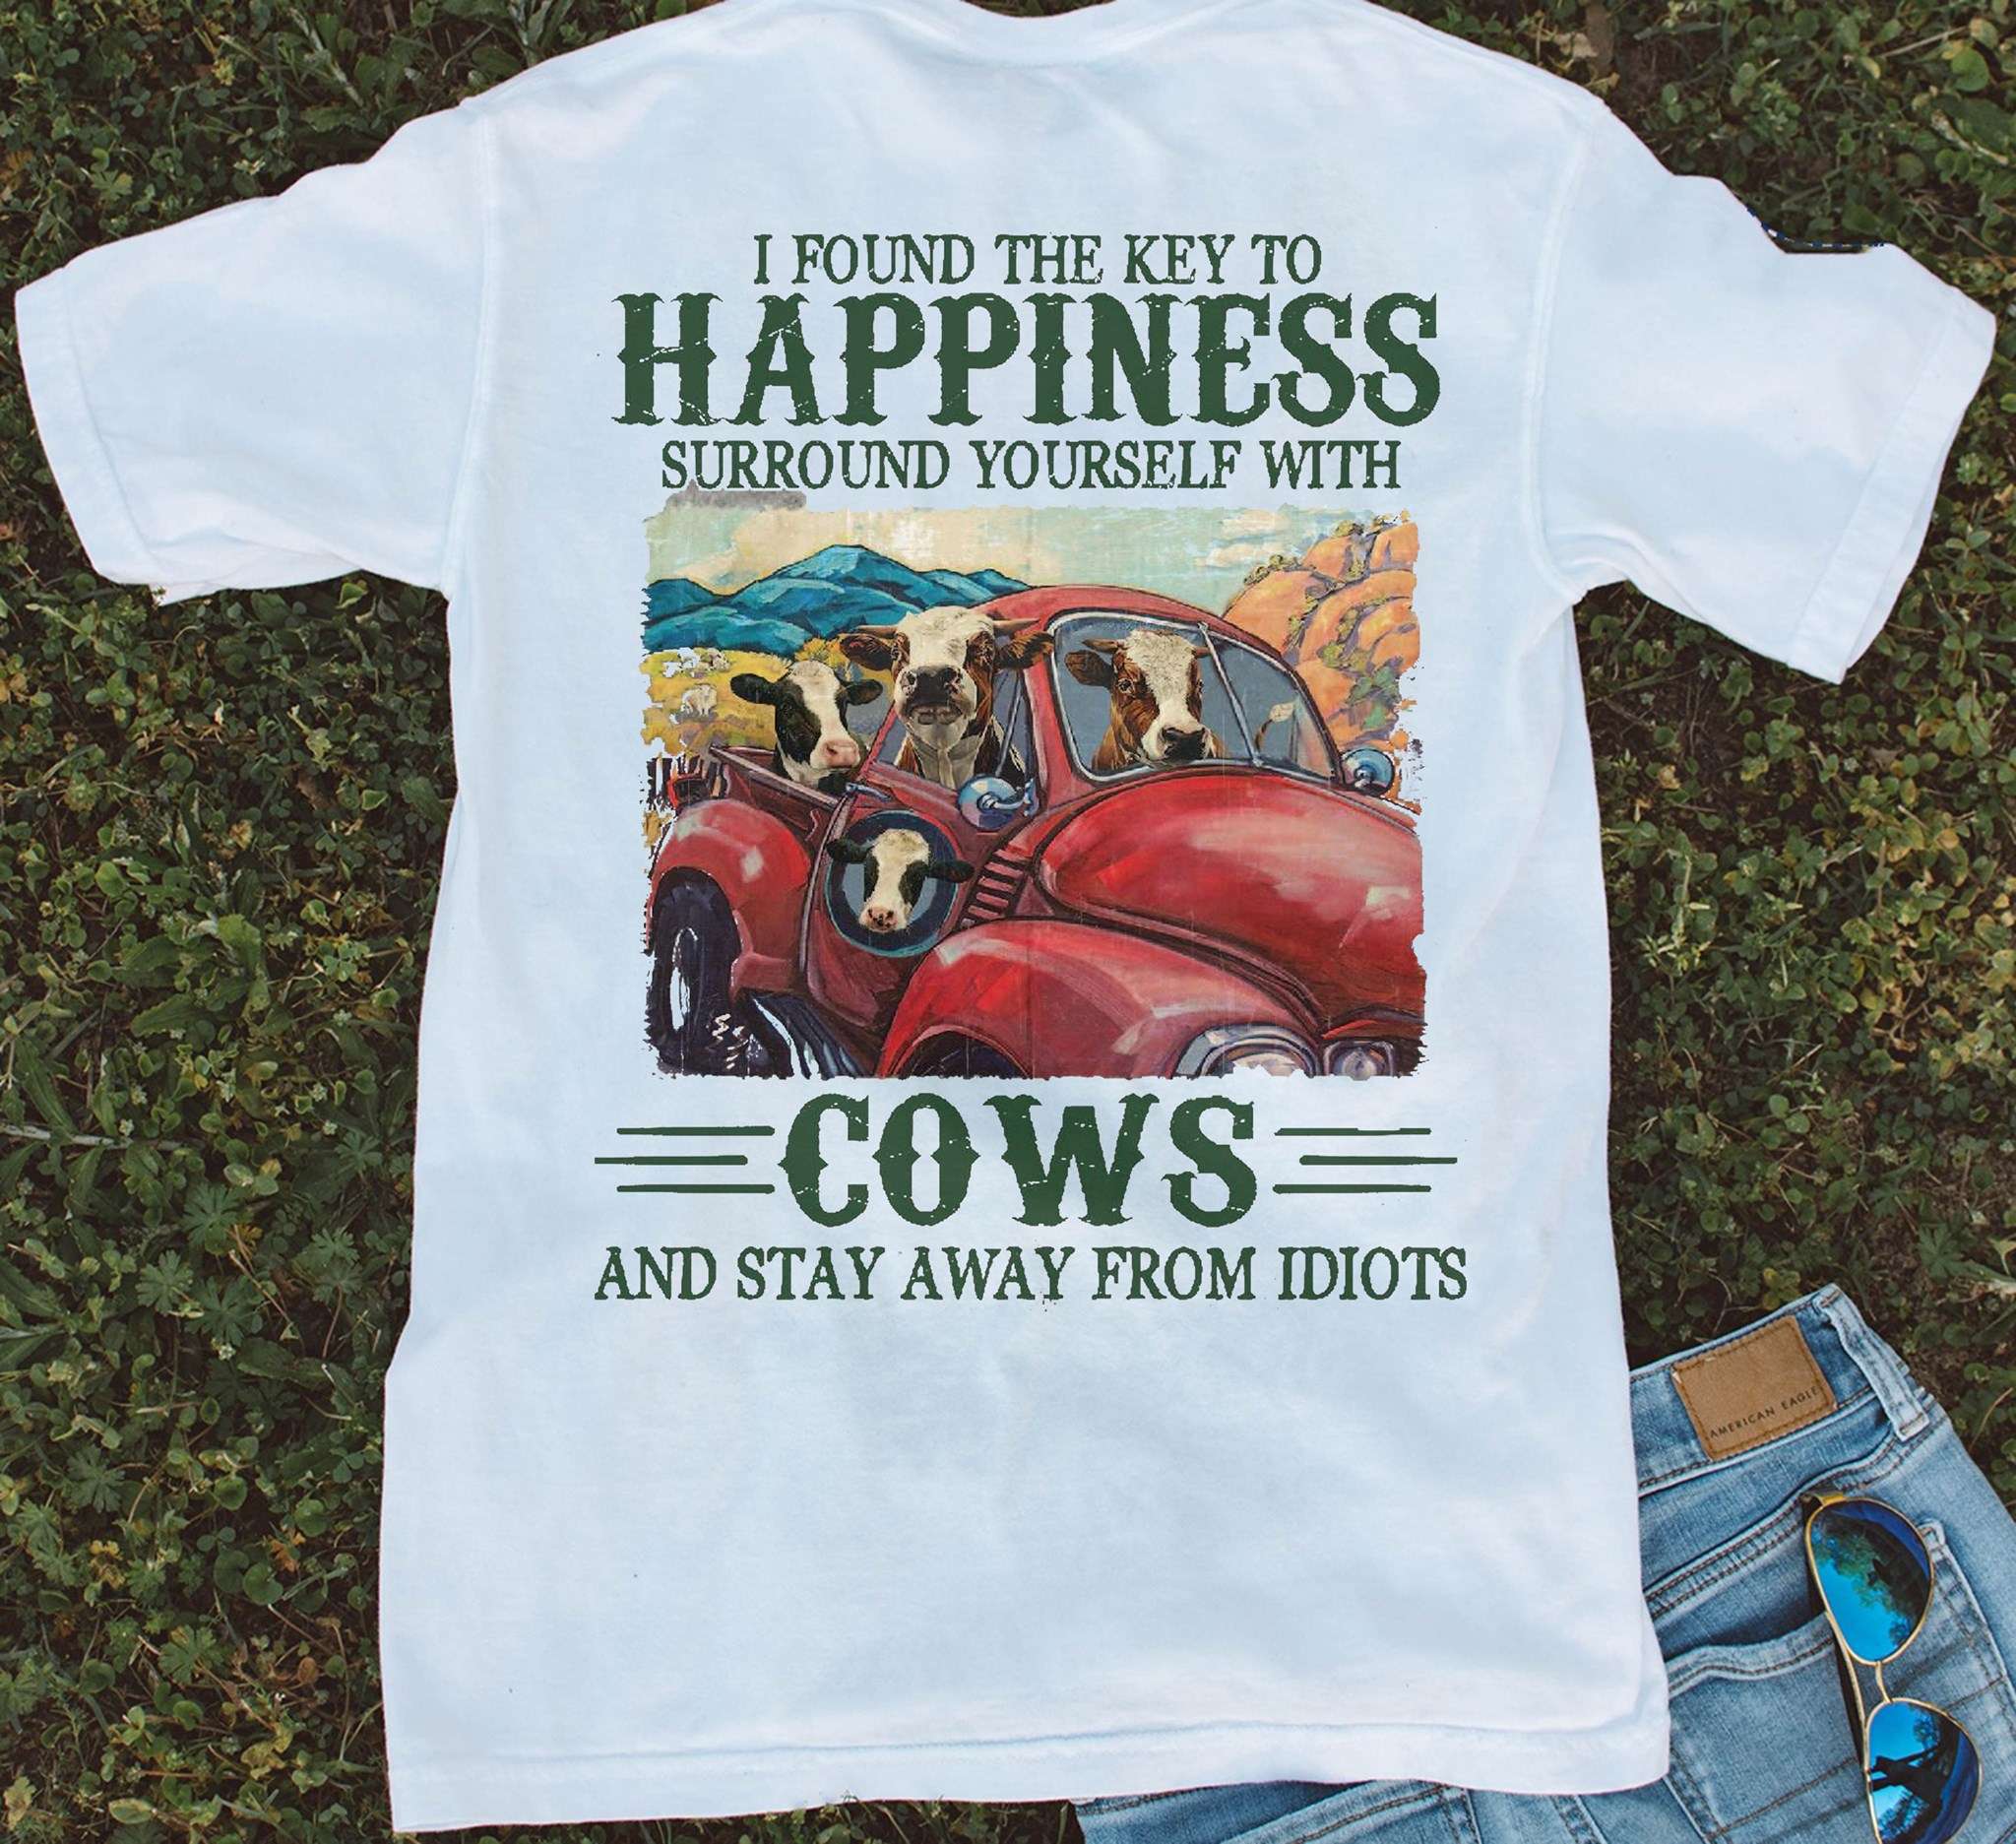 I found the key to happiness surround yourself with cows and stay away from idiots - Cows on truck